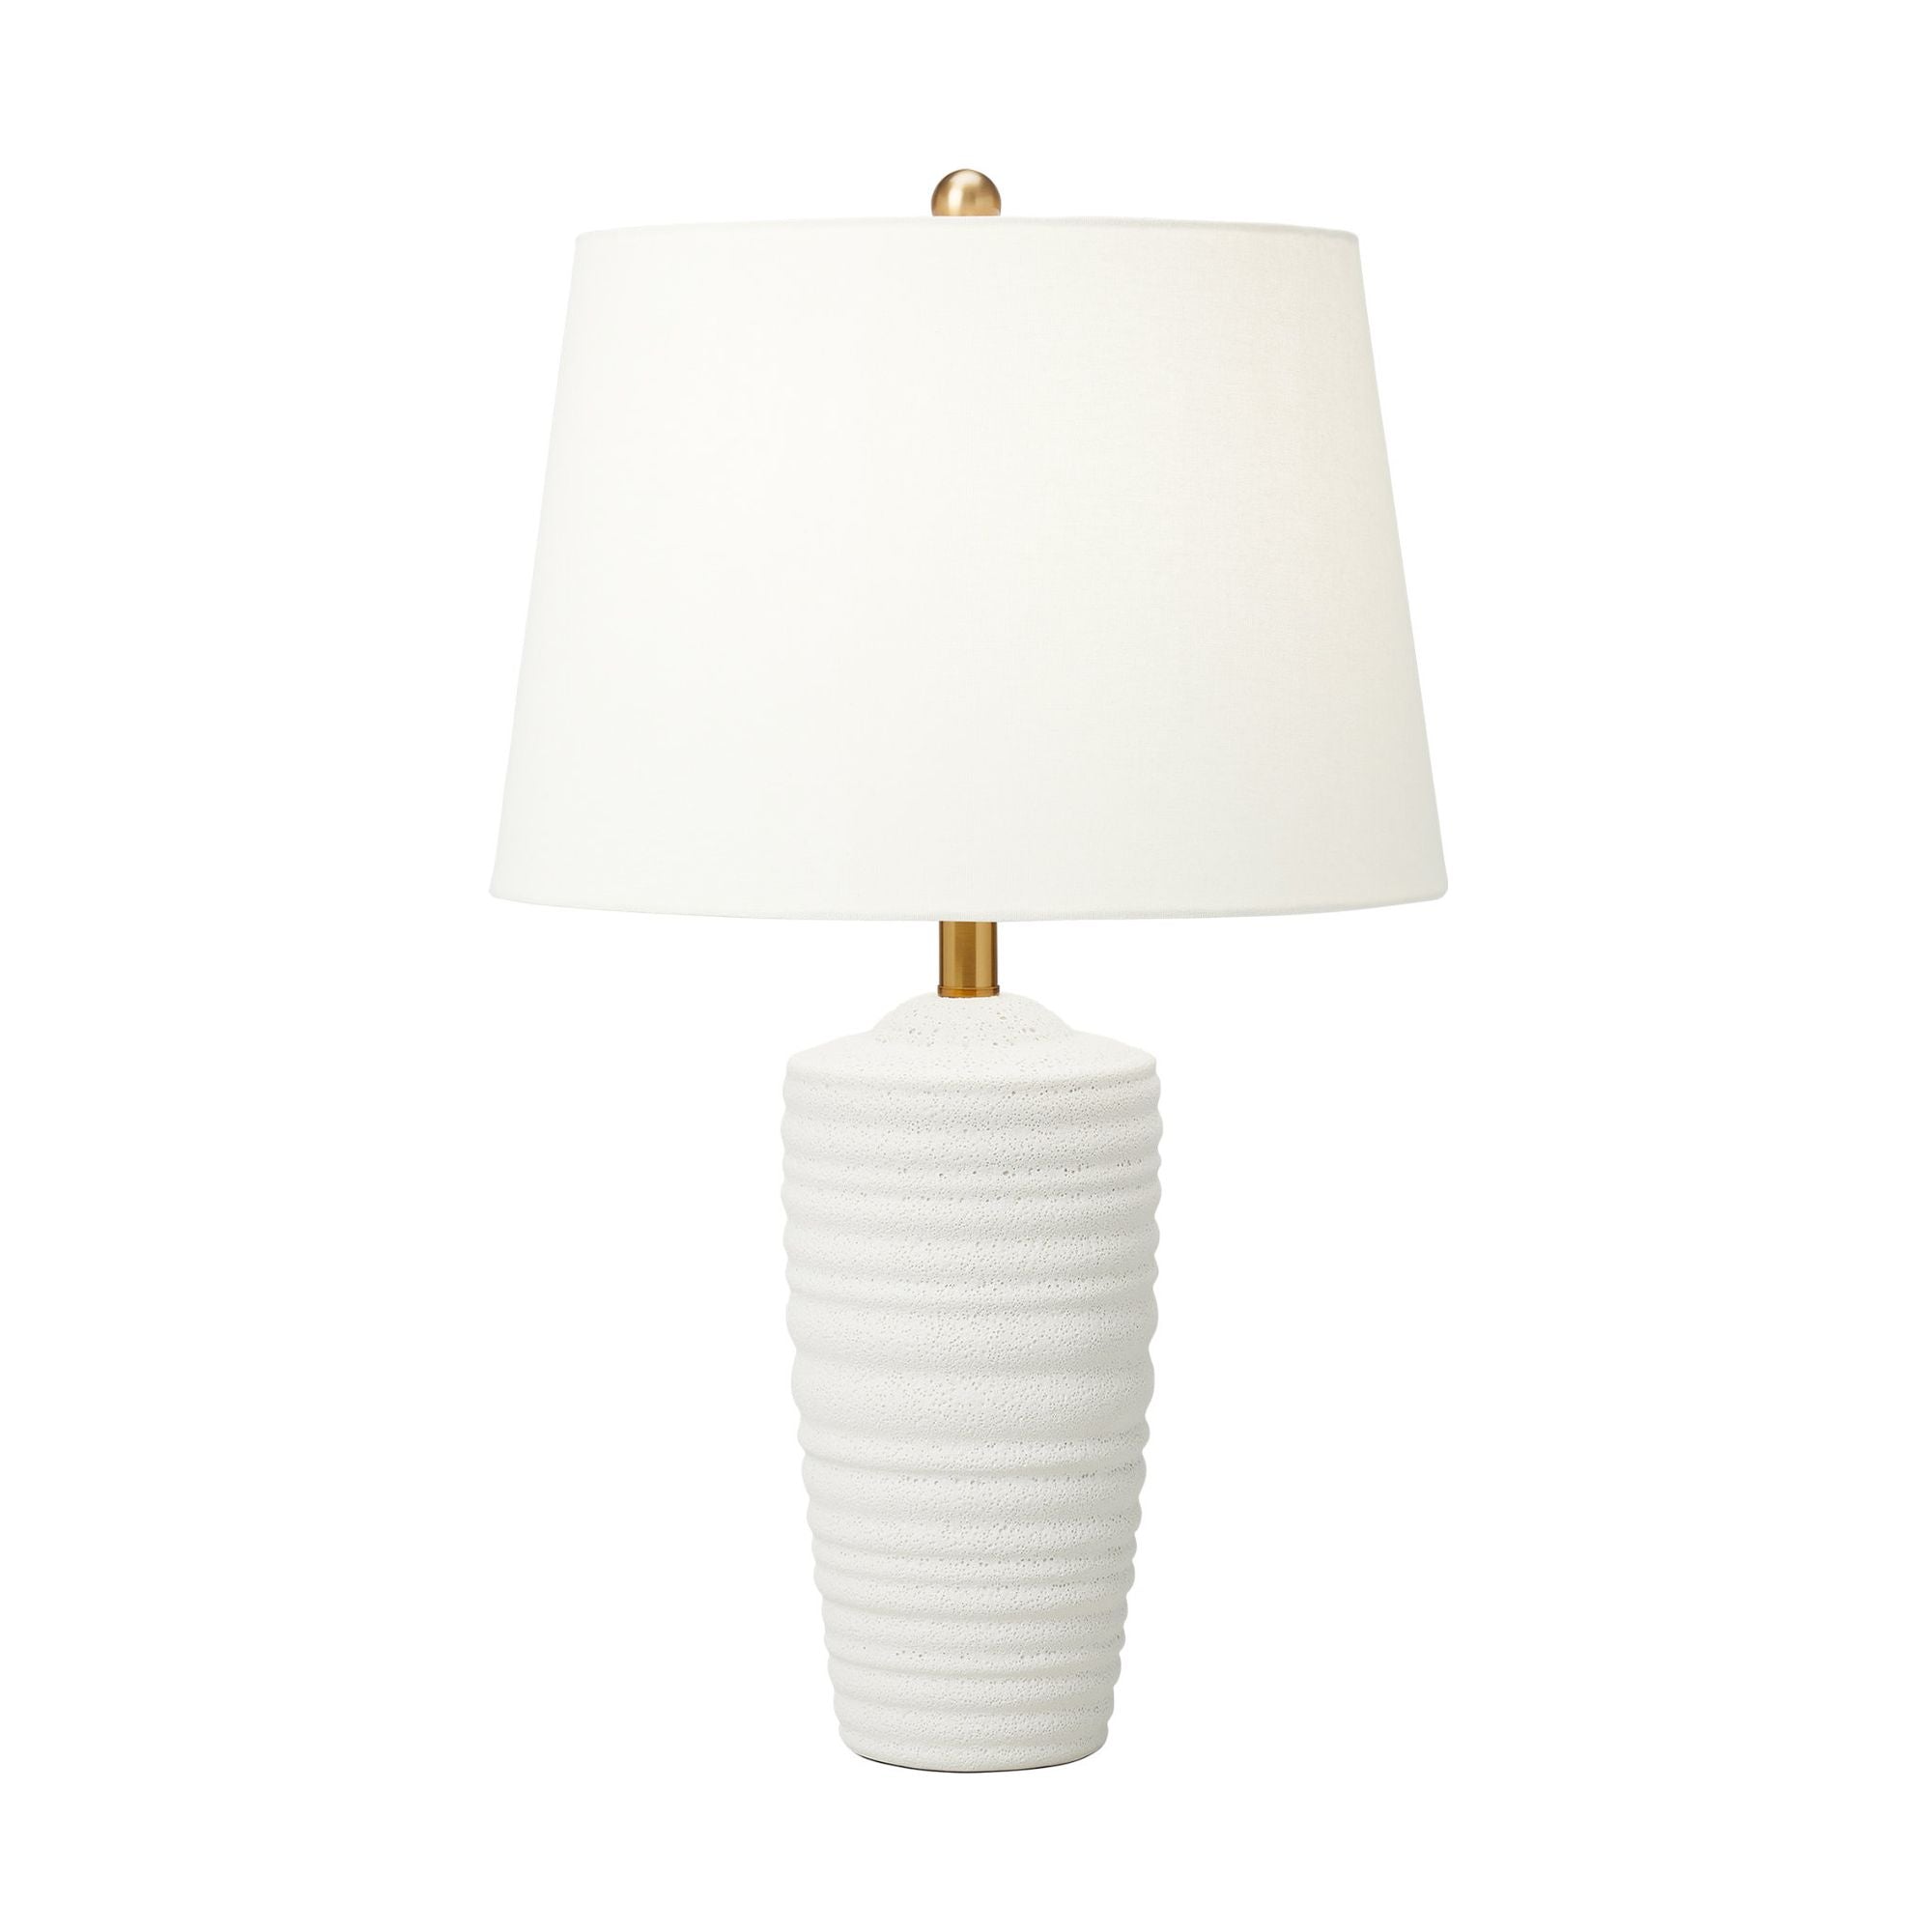 Chapman & Myers Waveland Table Lamp in Porous White